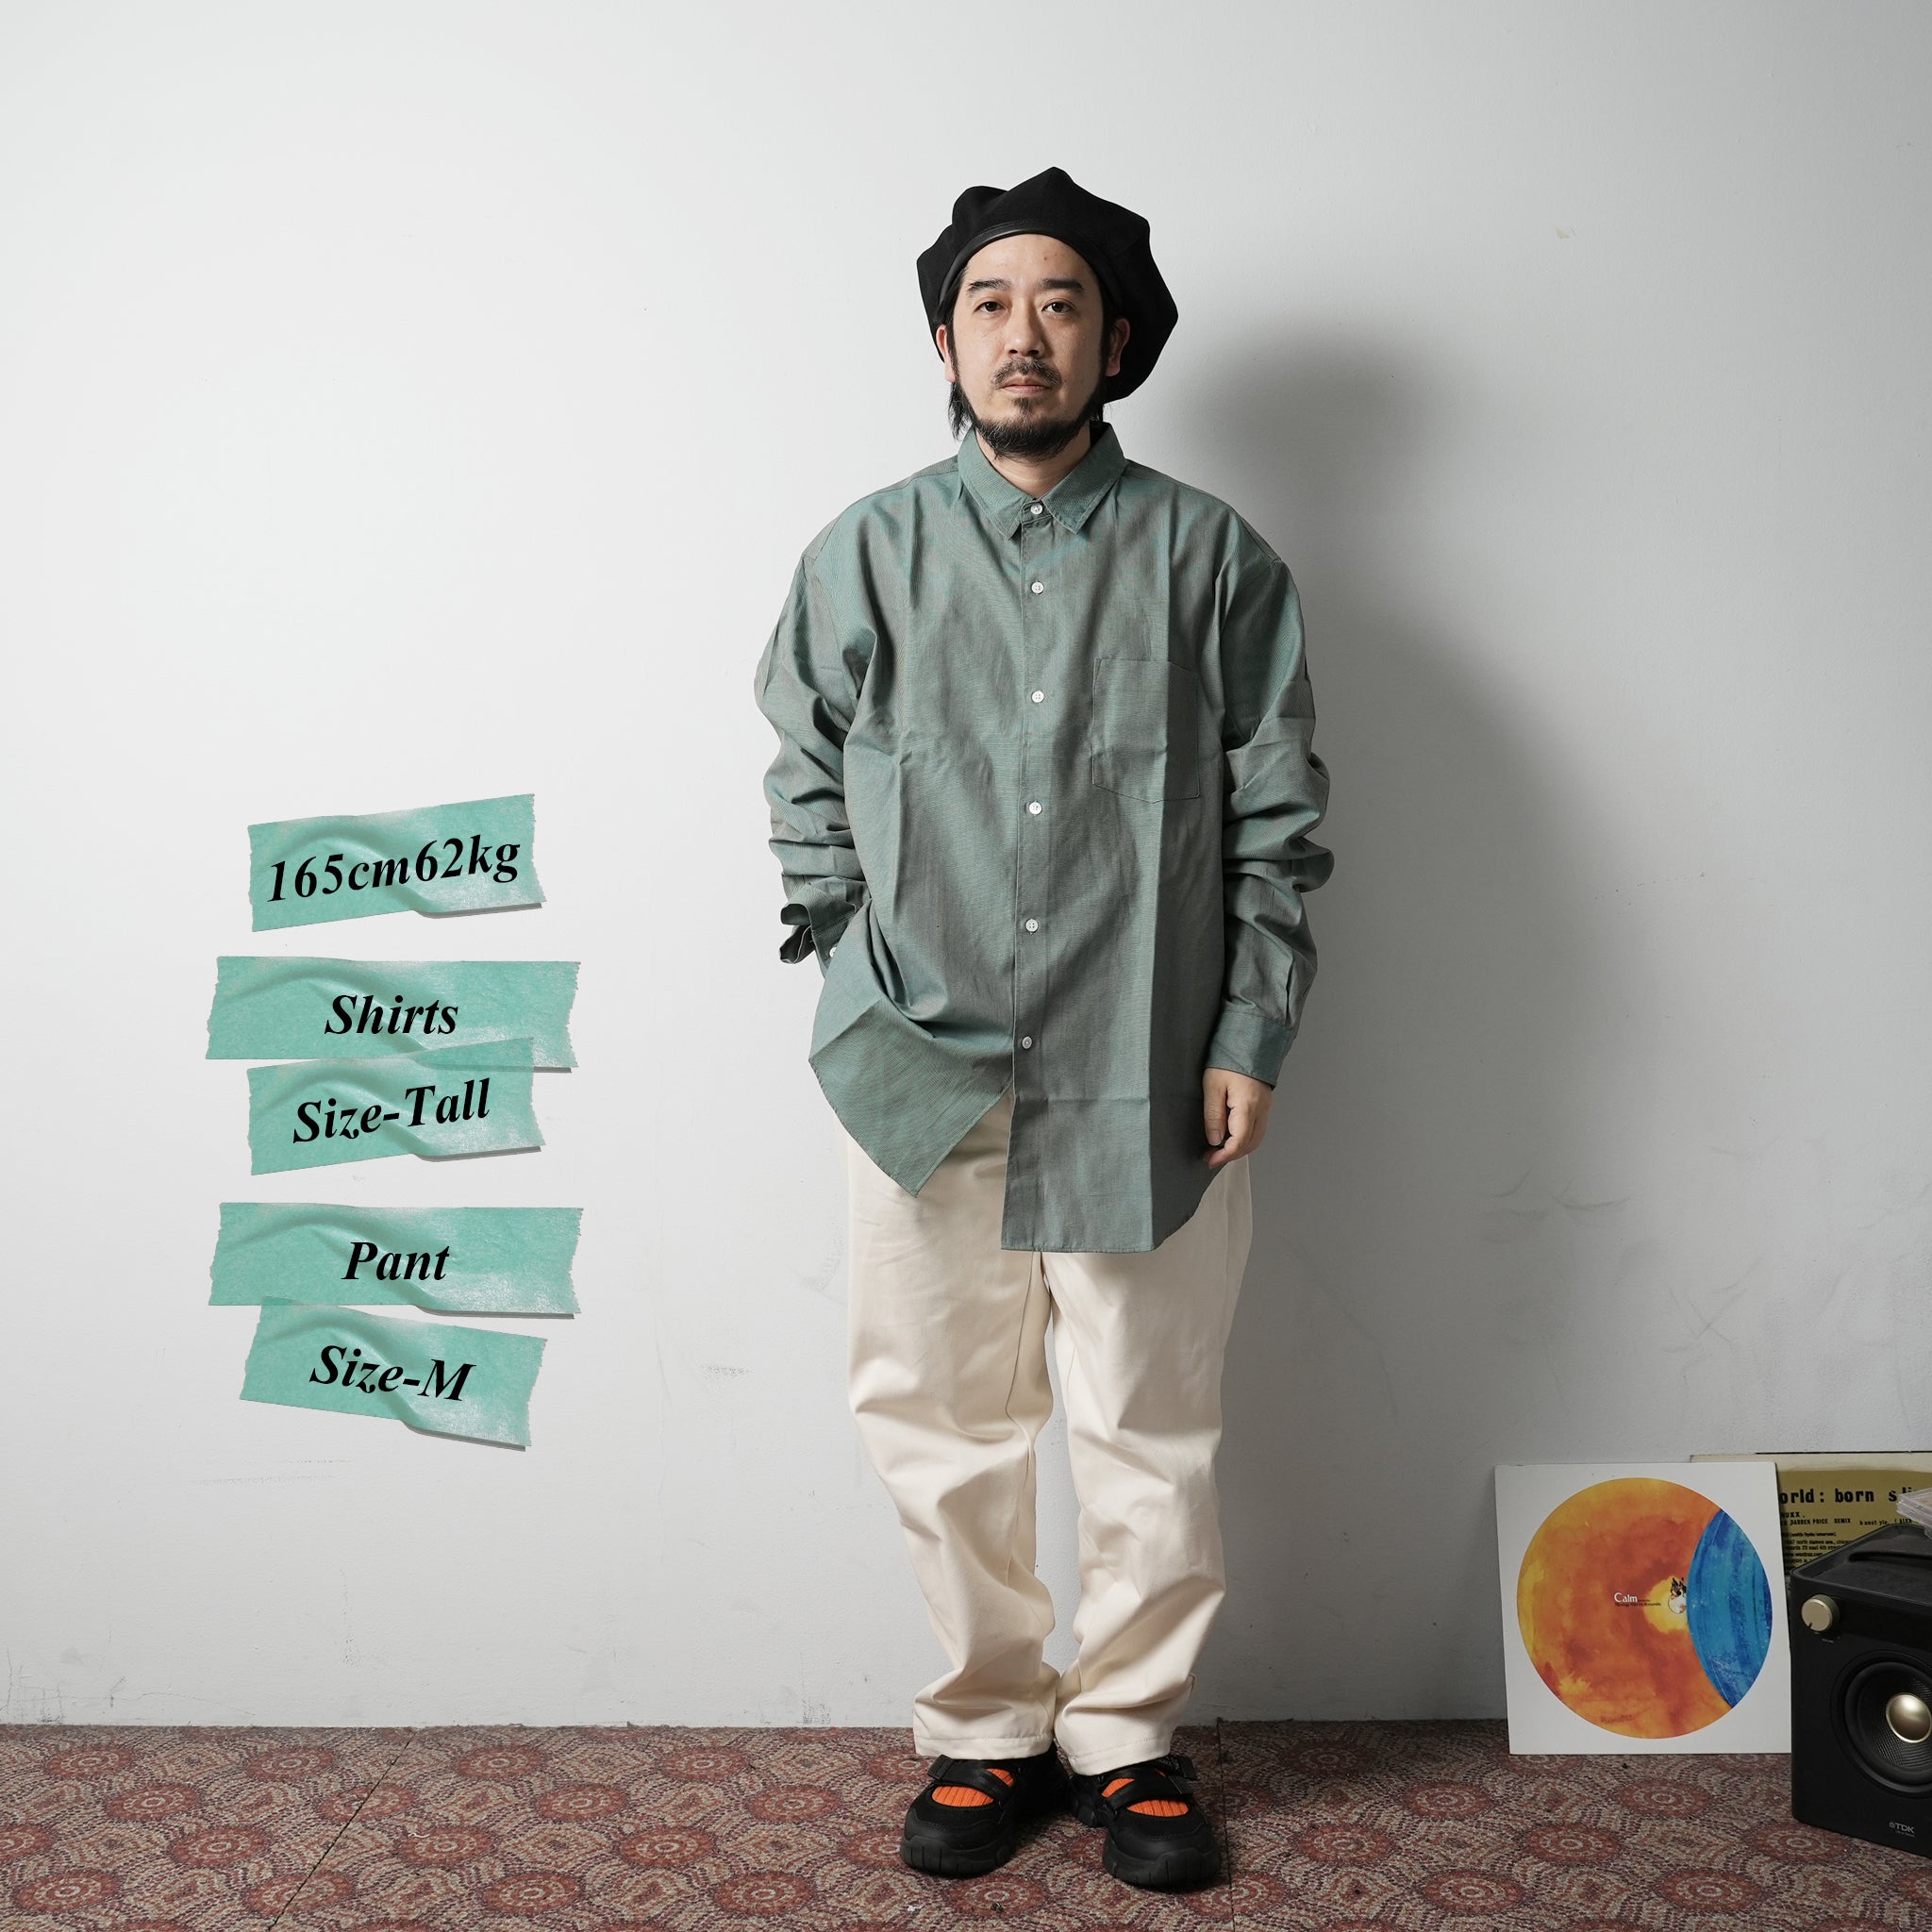 Name: OG REG SHIRTS | Color: Green | Size : Regular/Tall 【CITYLIGHTS PRODUCTS_シティライツプロダクツ】